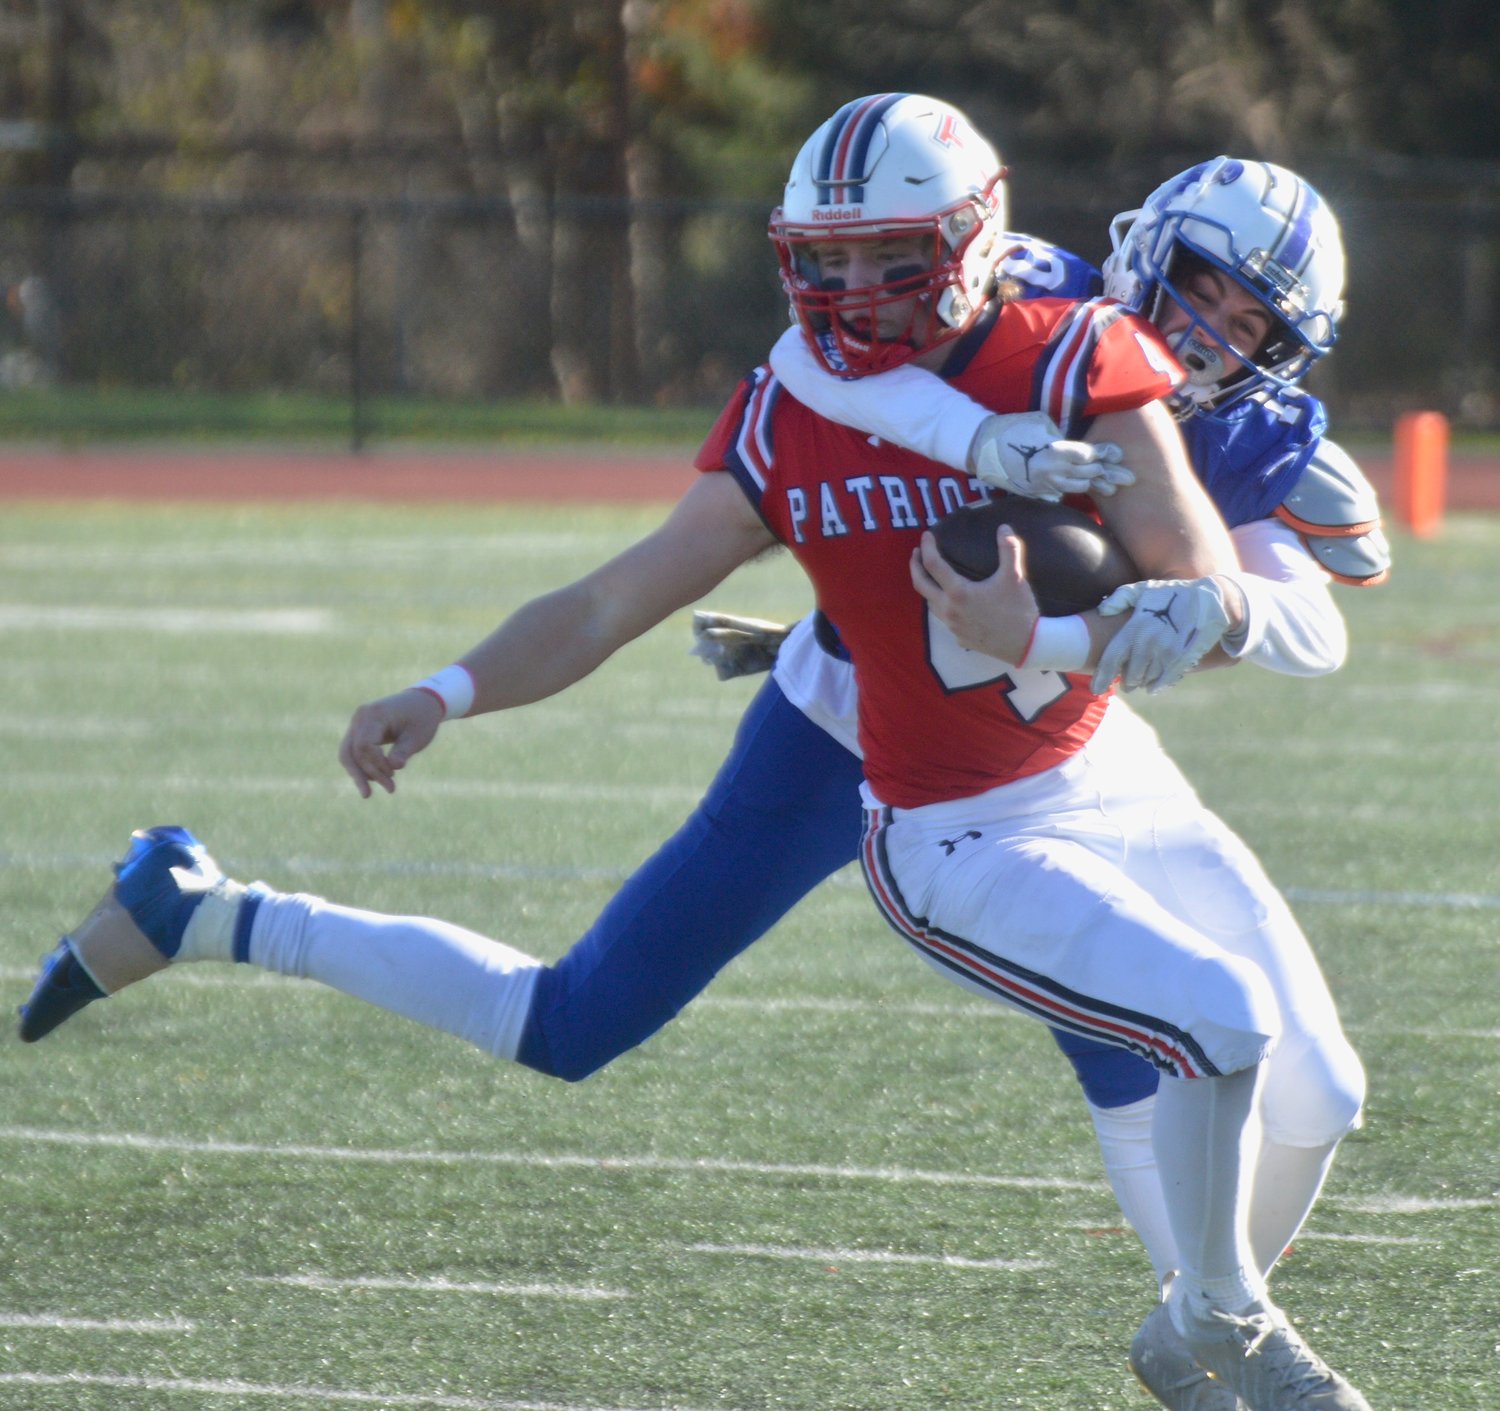 Patriots’ quarterback Neal Tullson is tackled on a keeper.